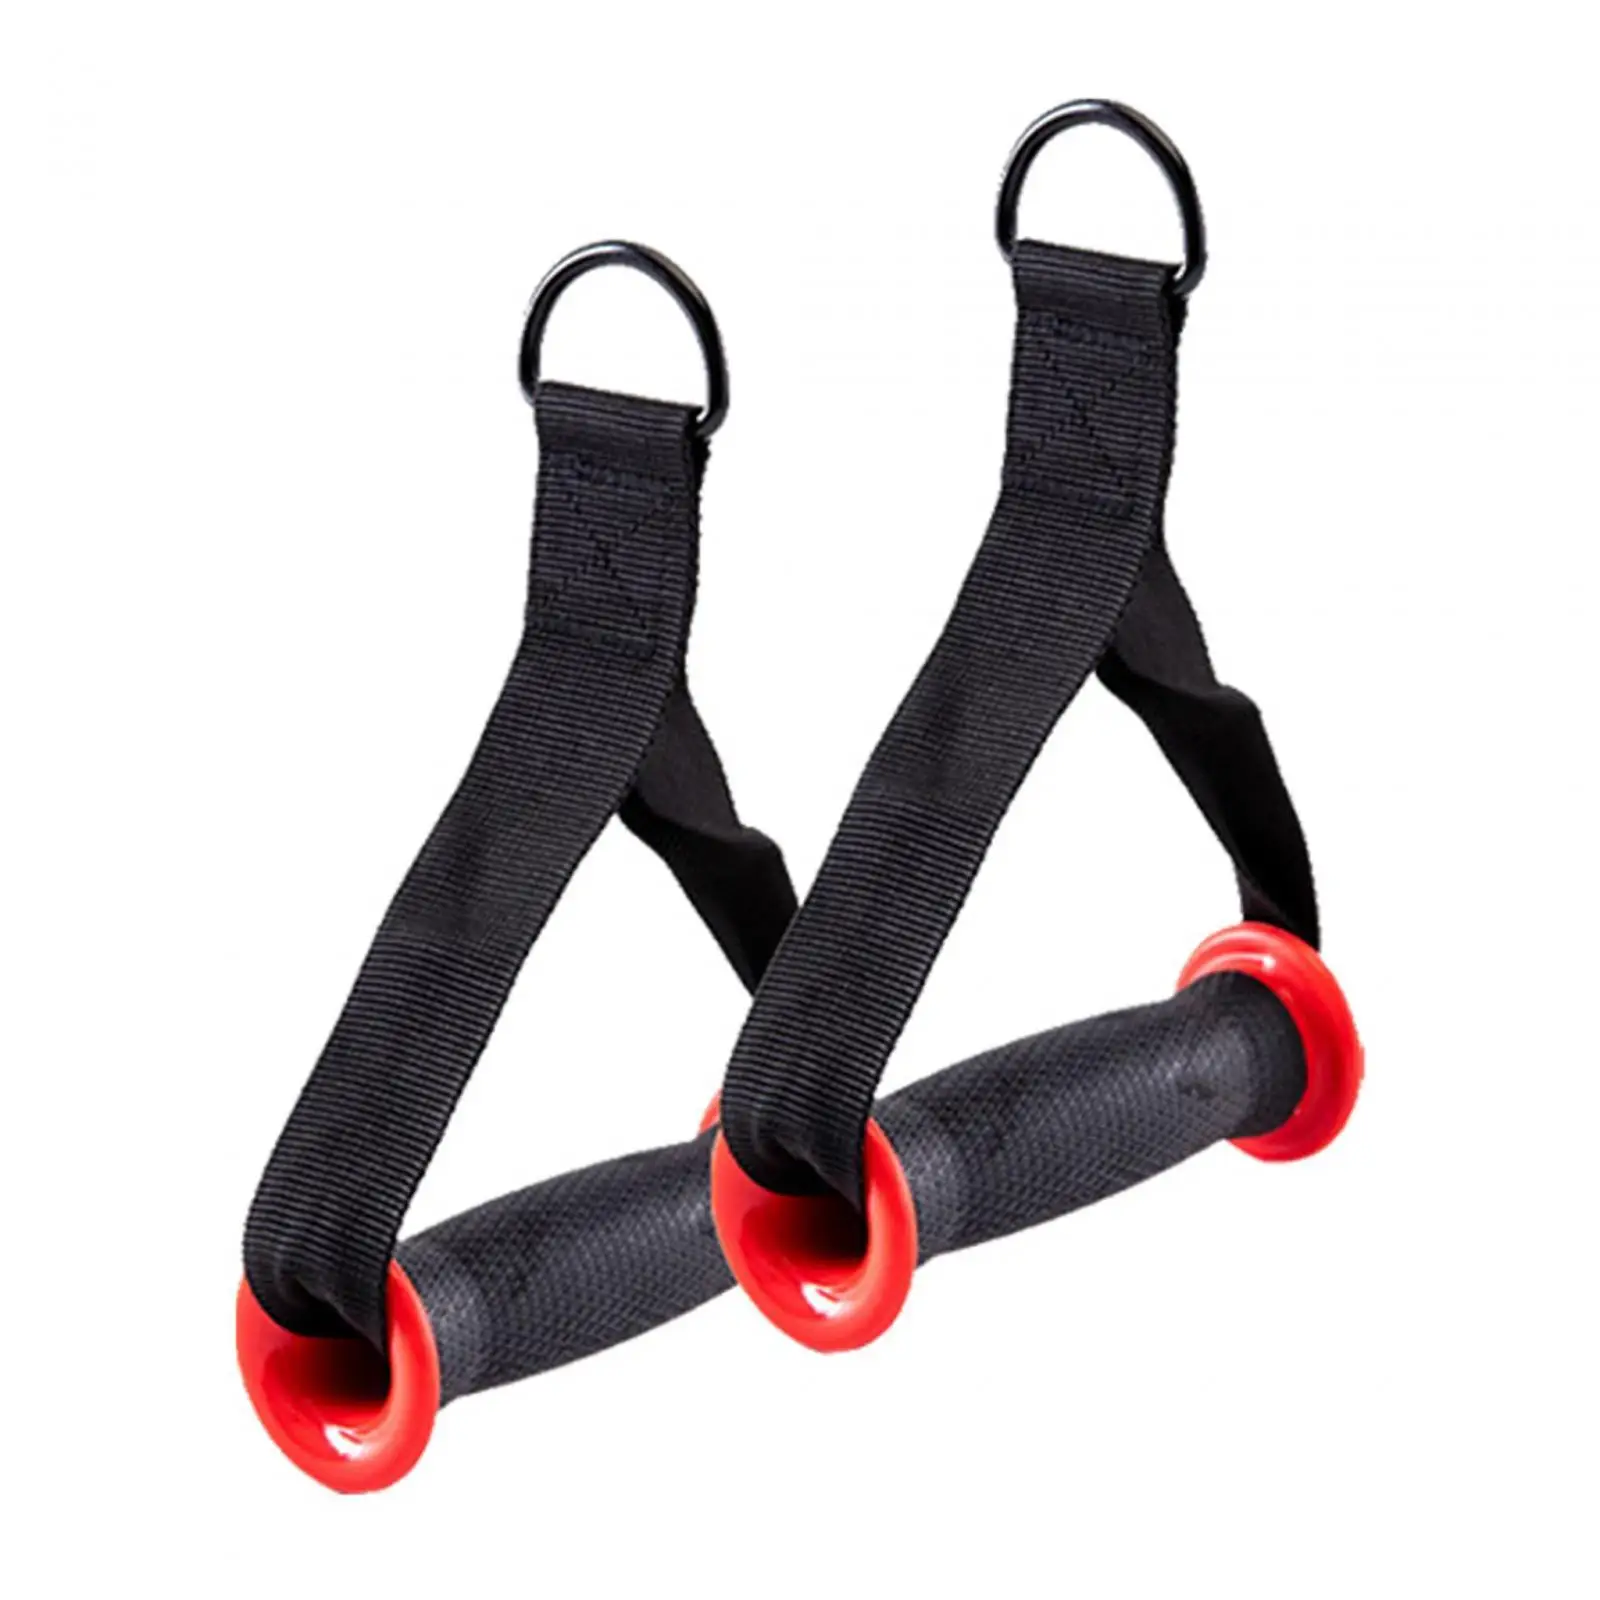 2 Pieces Gym Handle Resistance Exercise Gymnastics Hanging Accessories Push Pull Stretch Tube Gym Accessory Pull Band Handles